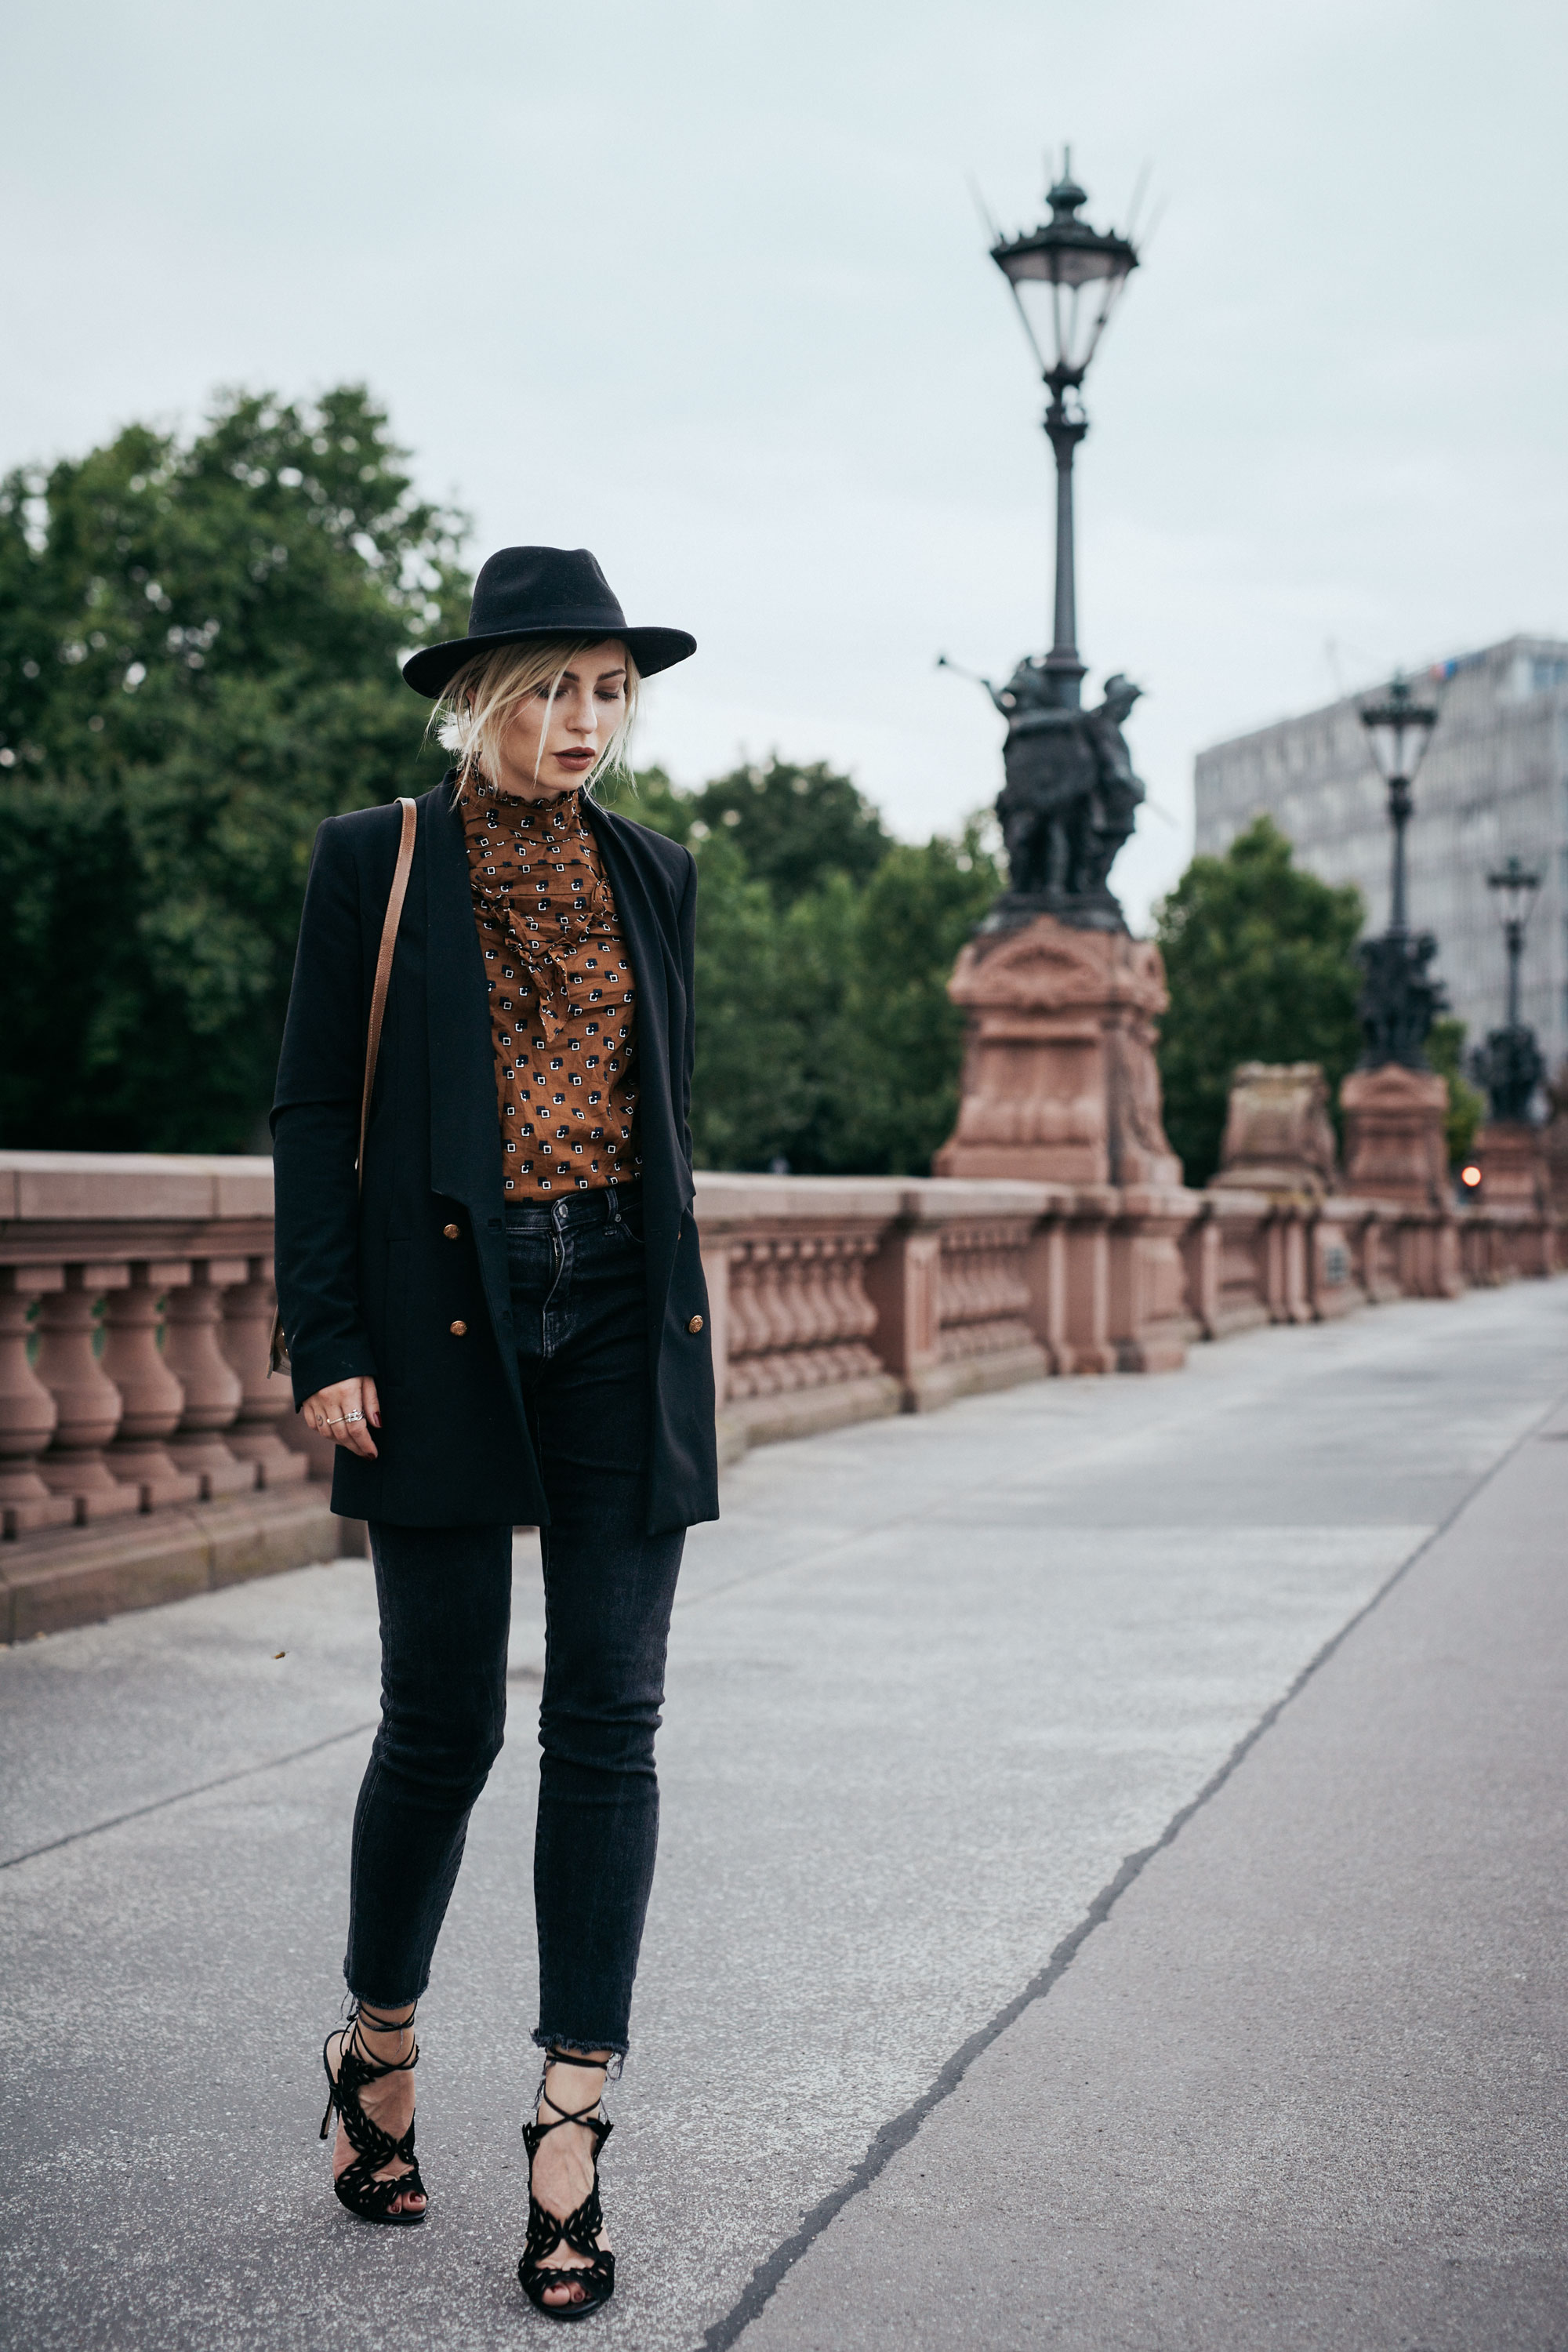 Autumn Outfit | style: boho, 20s, brown, graphic, romantic | find more pictures on my blog